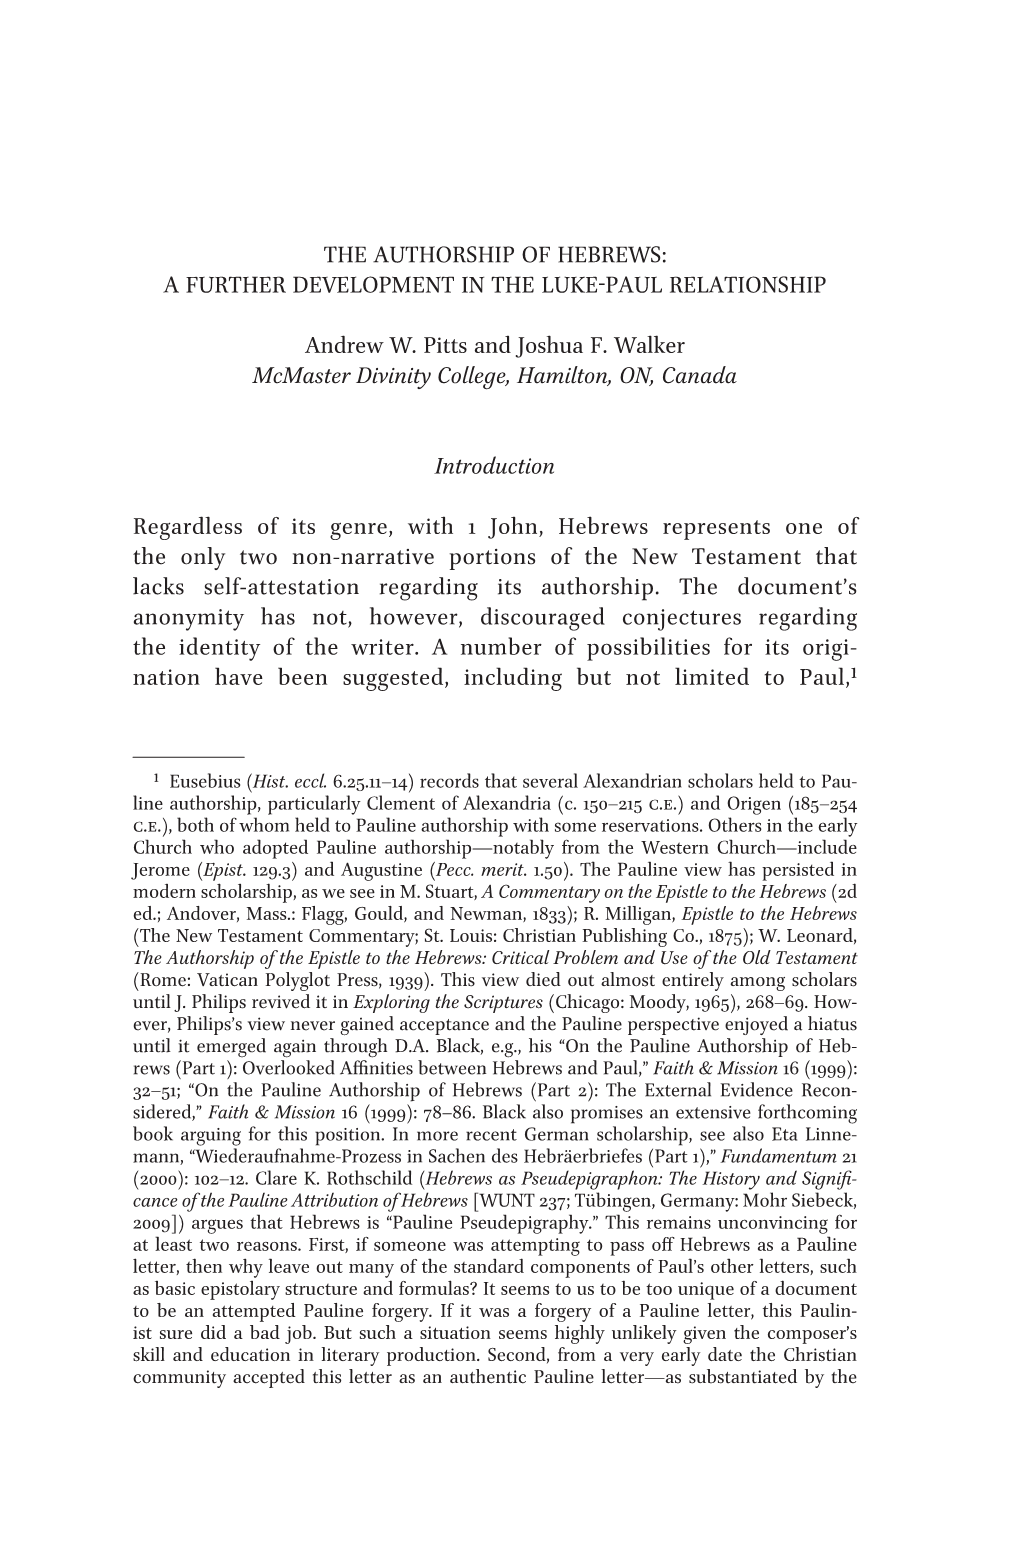 The Authorship of Hebrews: a Further Development in the Luke-Paul Relationship